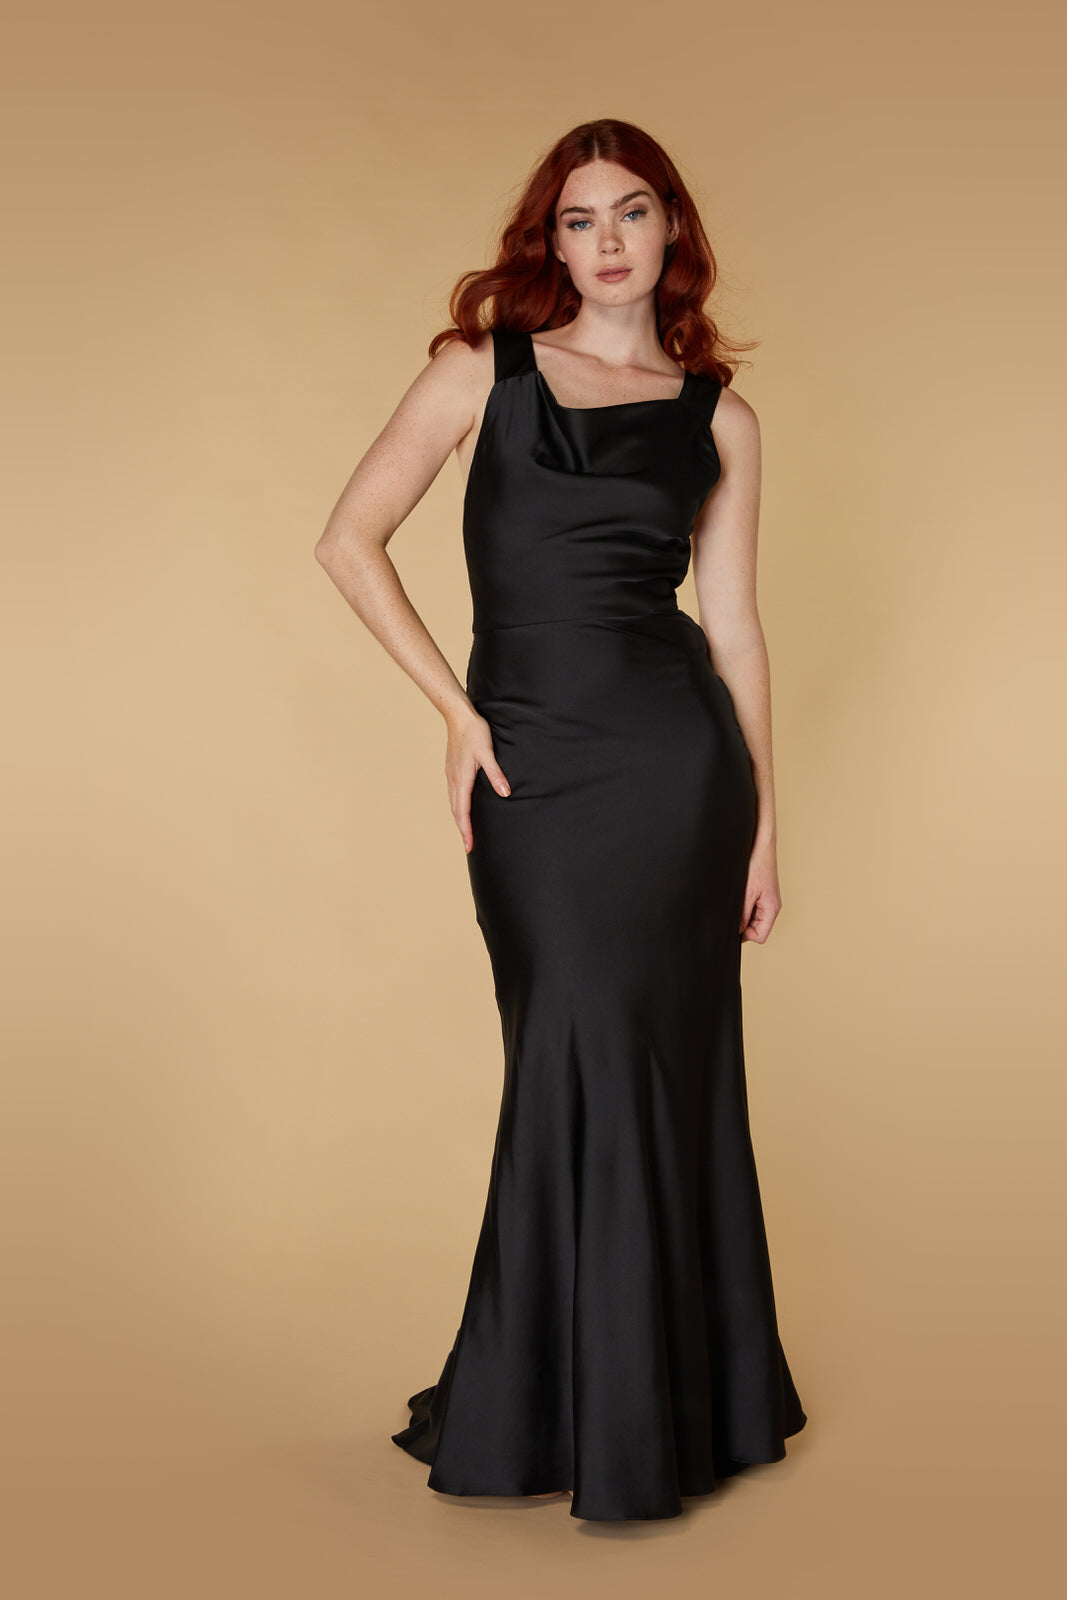 Jarlo Mika cowl front black satin maxi dress with strap back detail